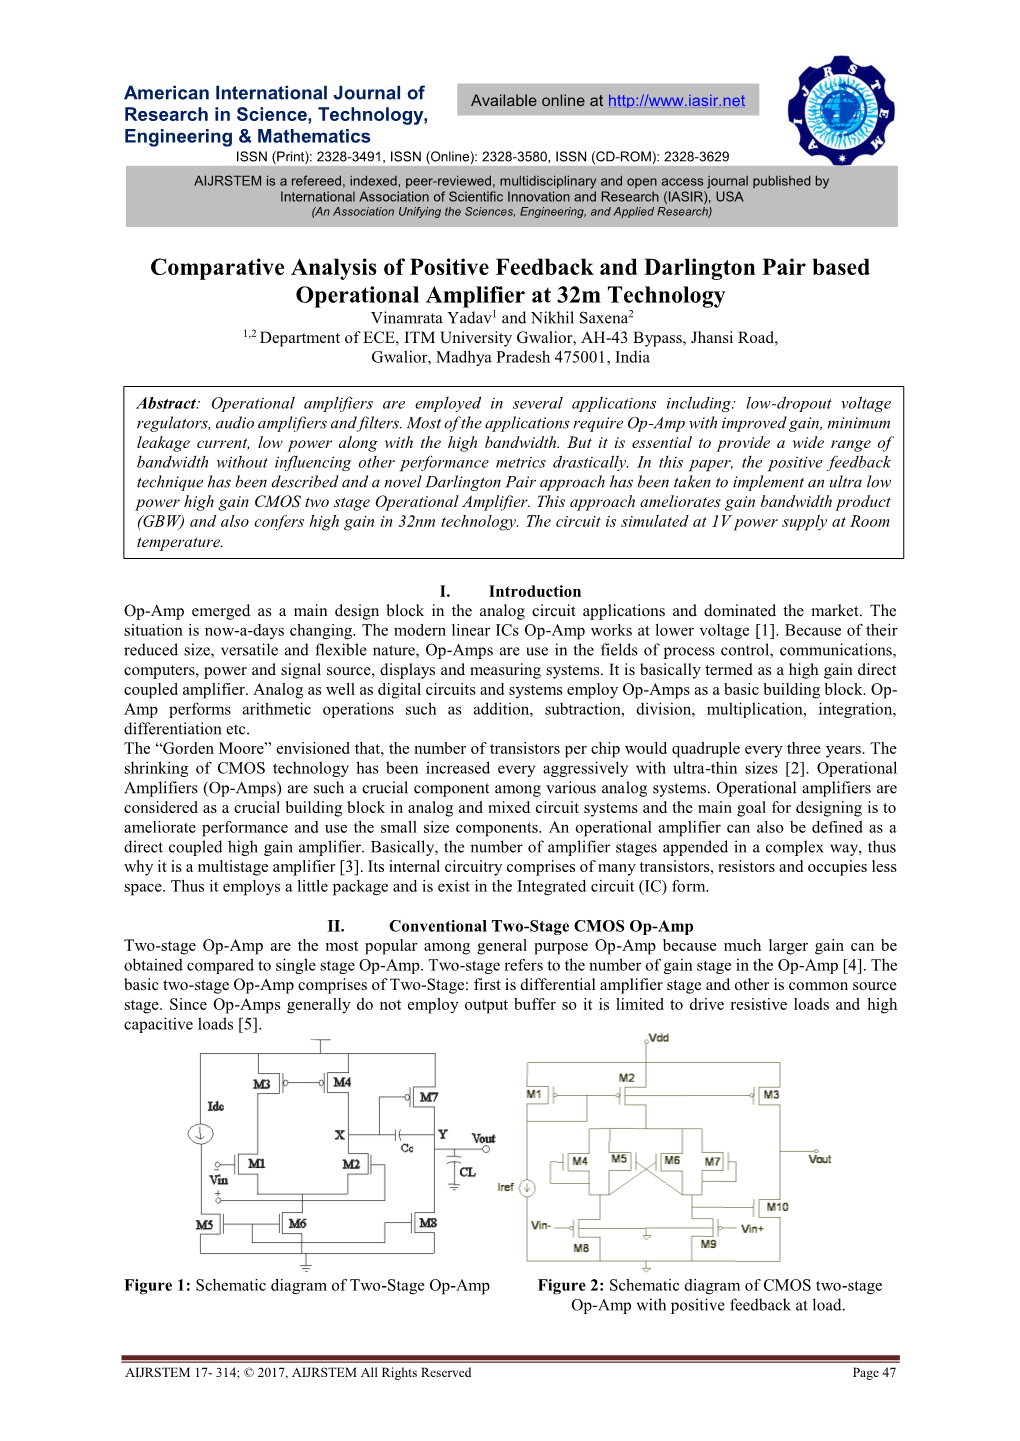 Comparative Analysis of Positive Feedback and Darlington Pair